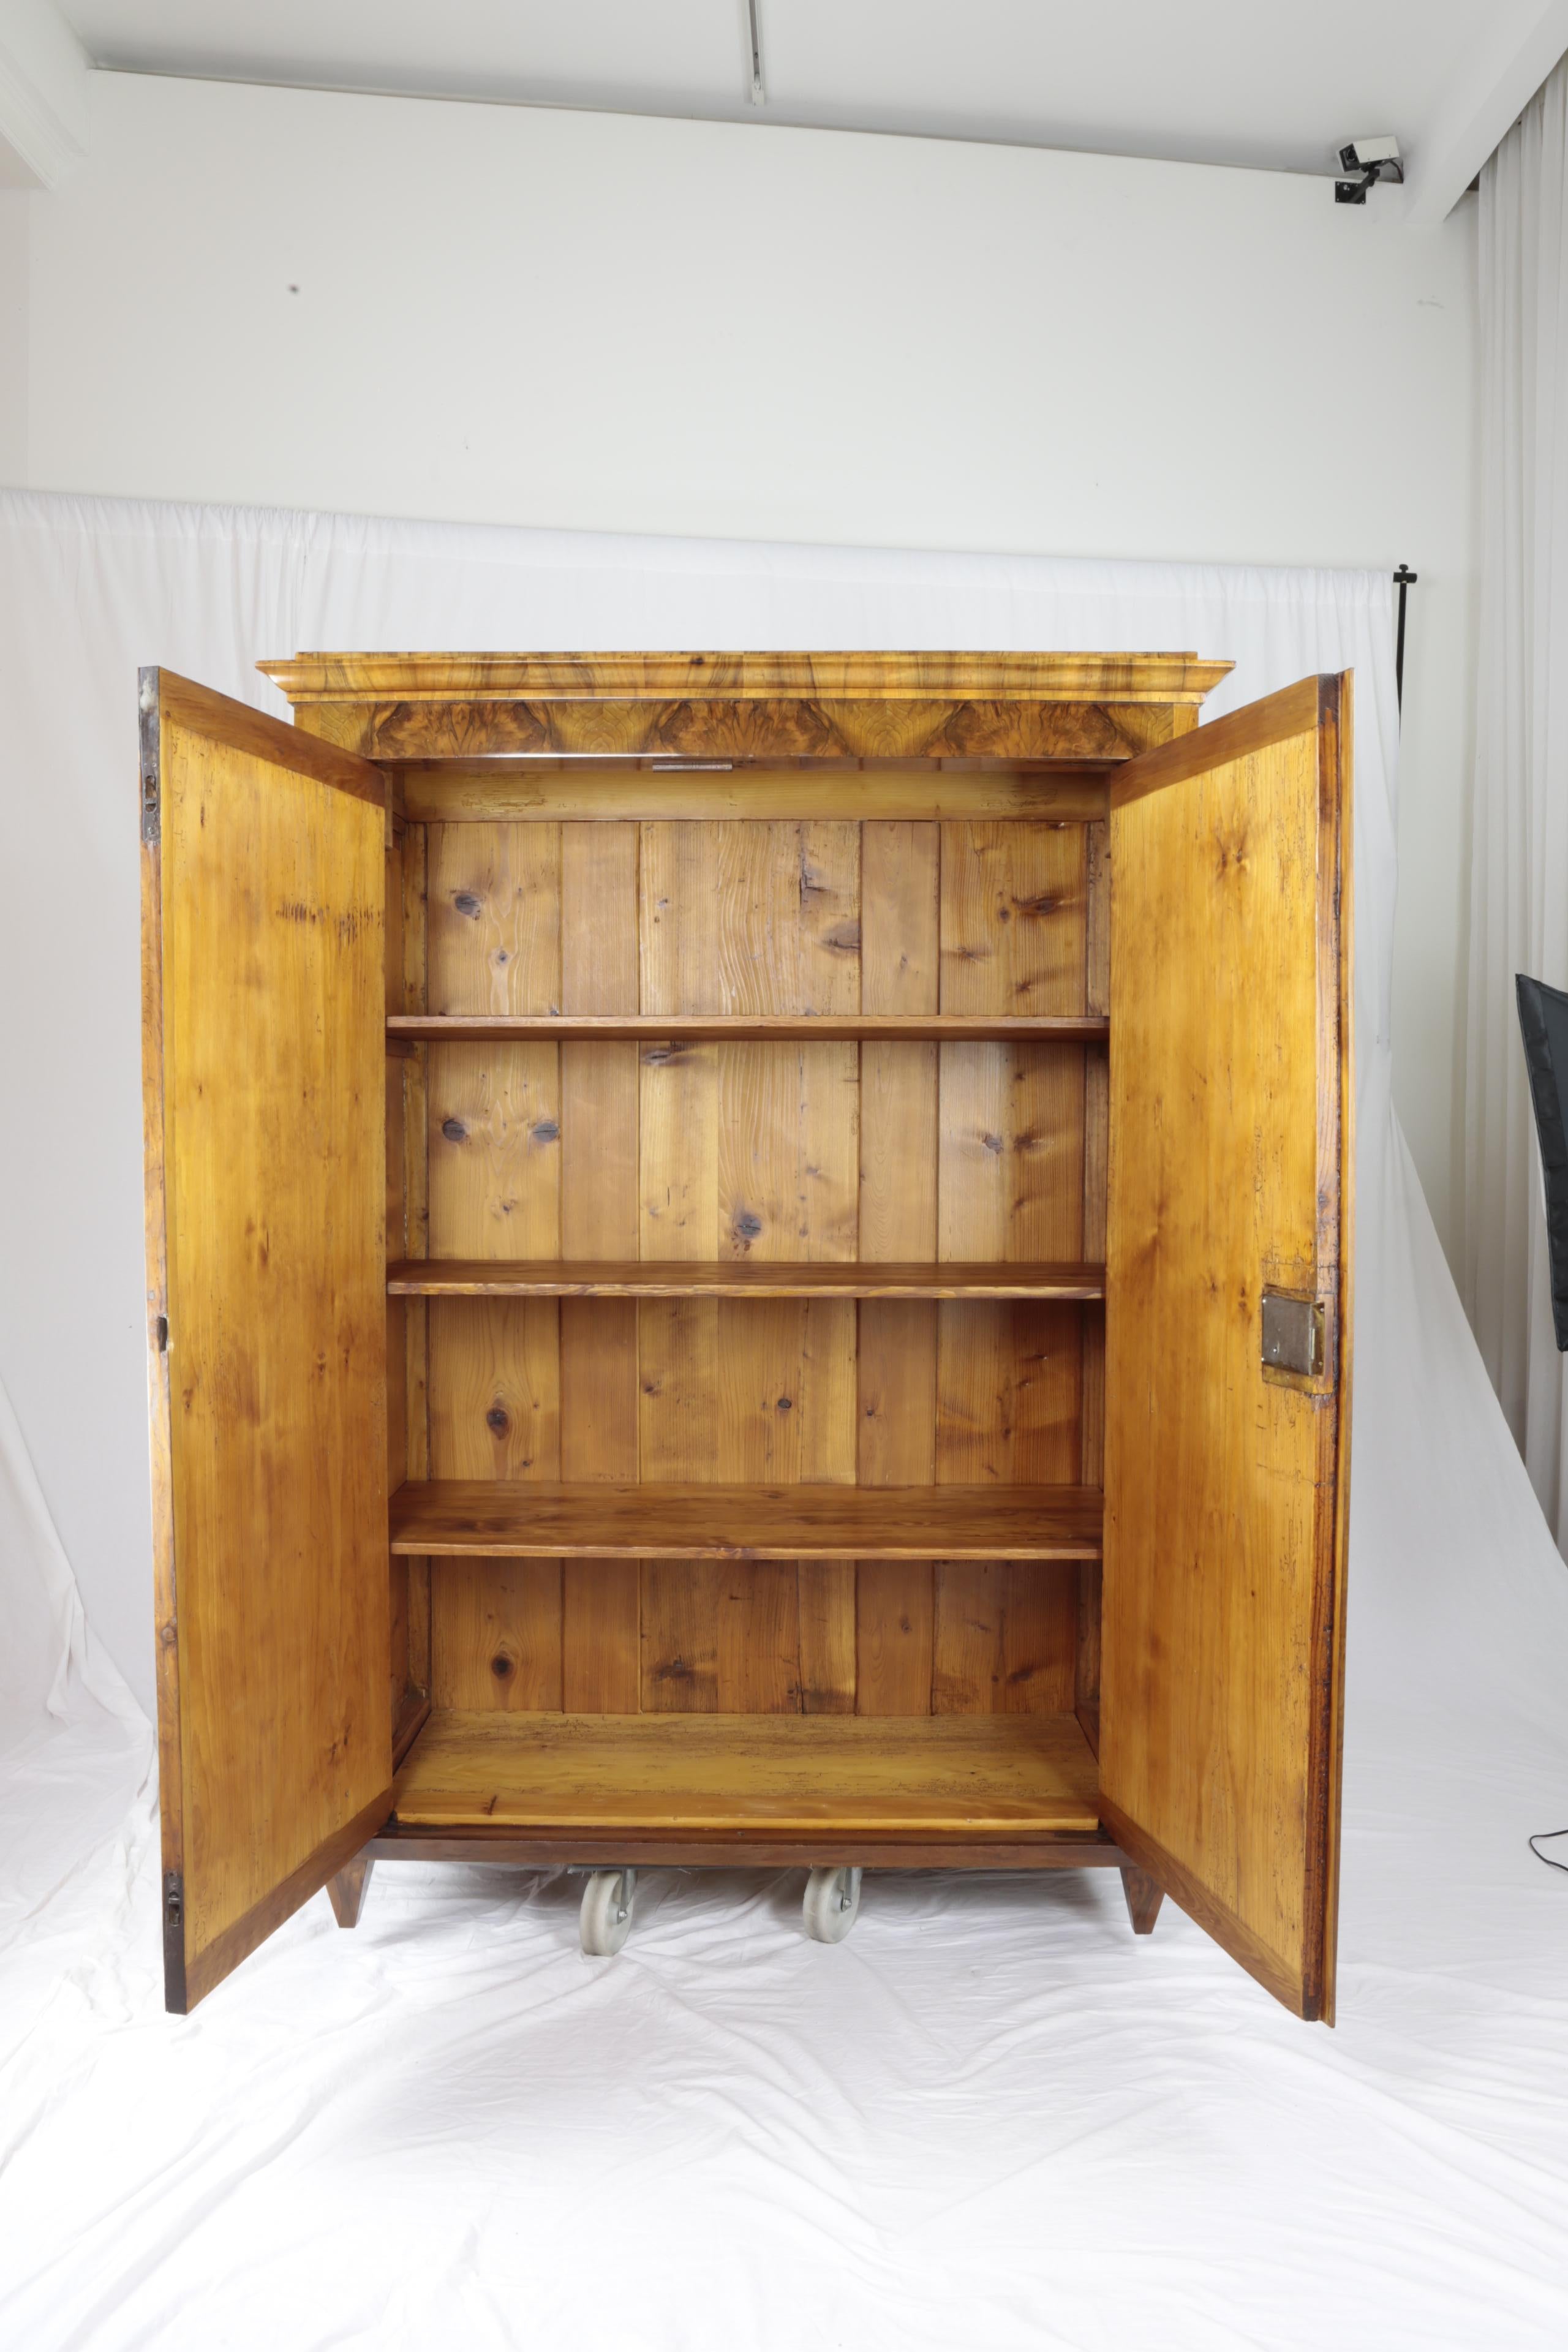 Beautiful two-door Biedermeier period cabinet with harmonious proportions, circa 1830, nutwood veneer, shelved interior, restored condition, shellac polished surface. The beautifully mirrored veneer was carefully polished by hand with